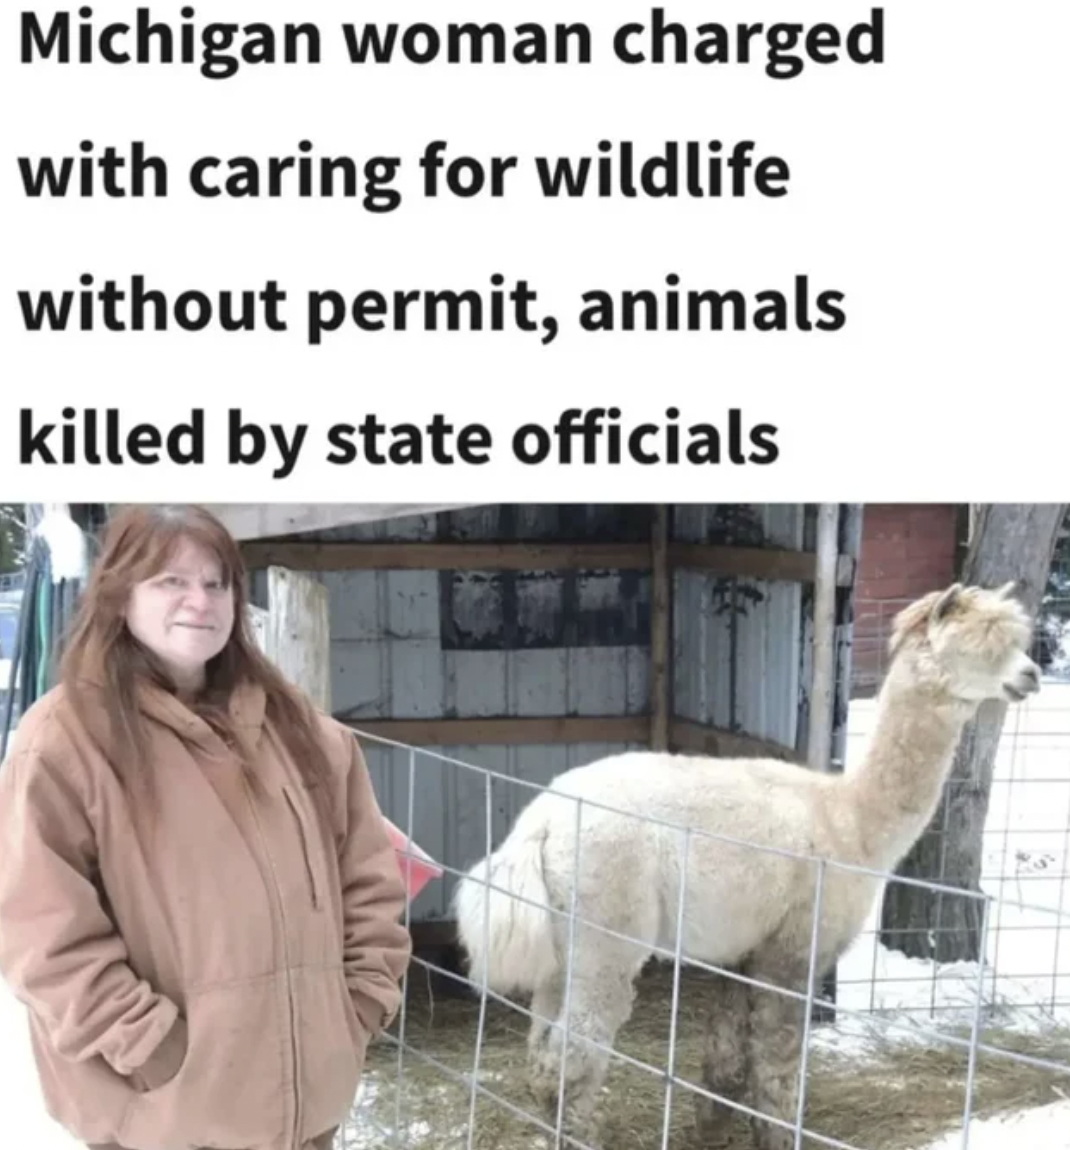 Friday Facepalms and Fails - Michigan woman charged with caring for wildlife without permit, animals killed by state officials